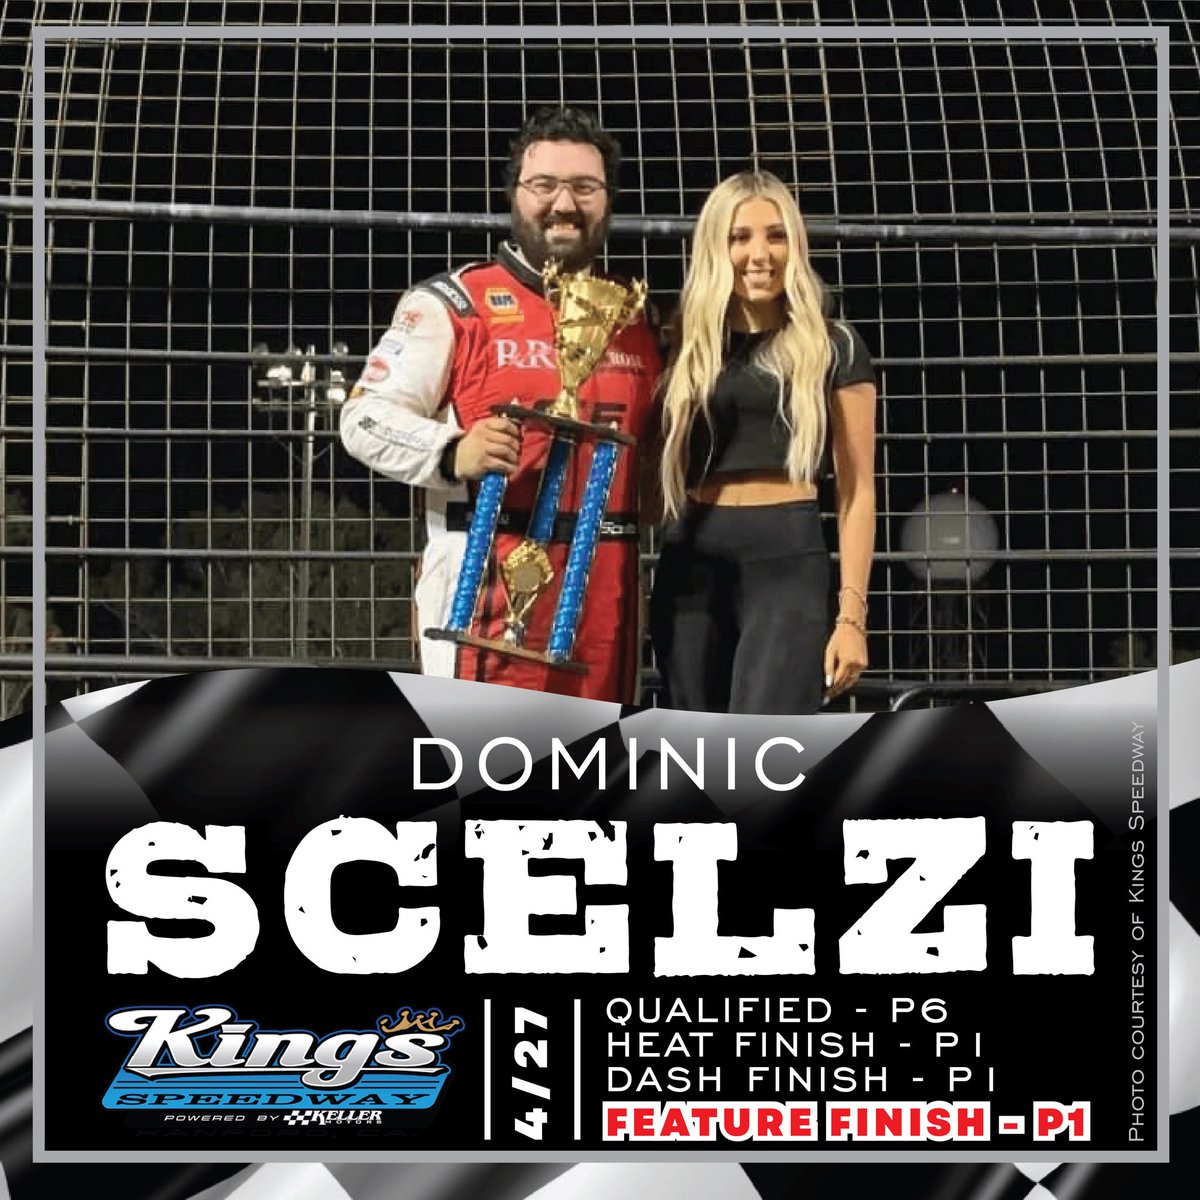 Saturday showcased the first feature victory of the season for Dominic Scelzi! #TeamILP